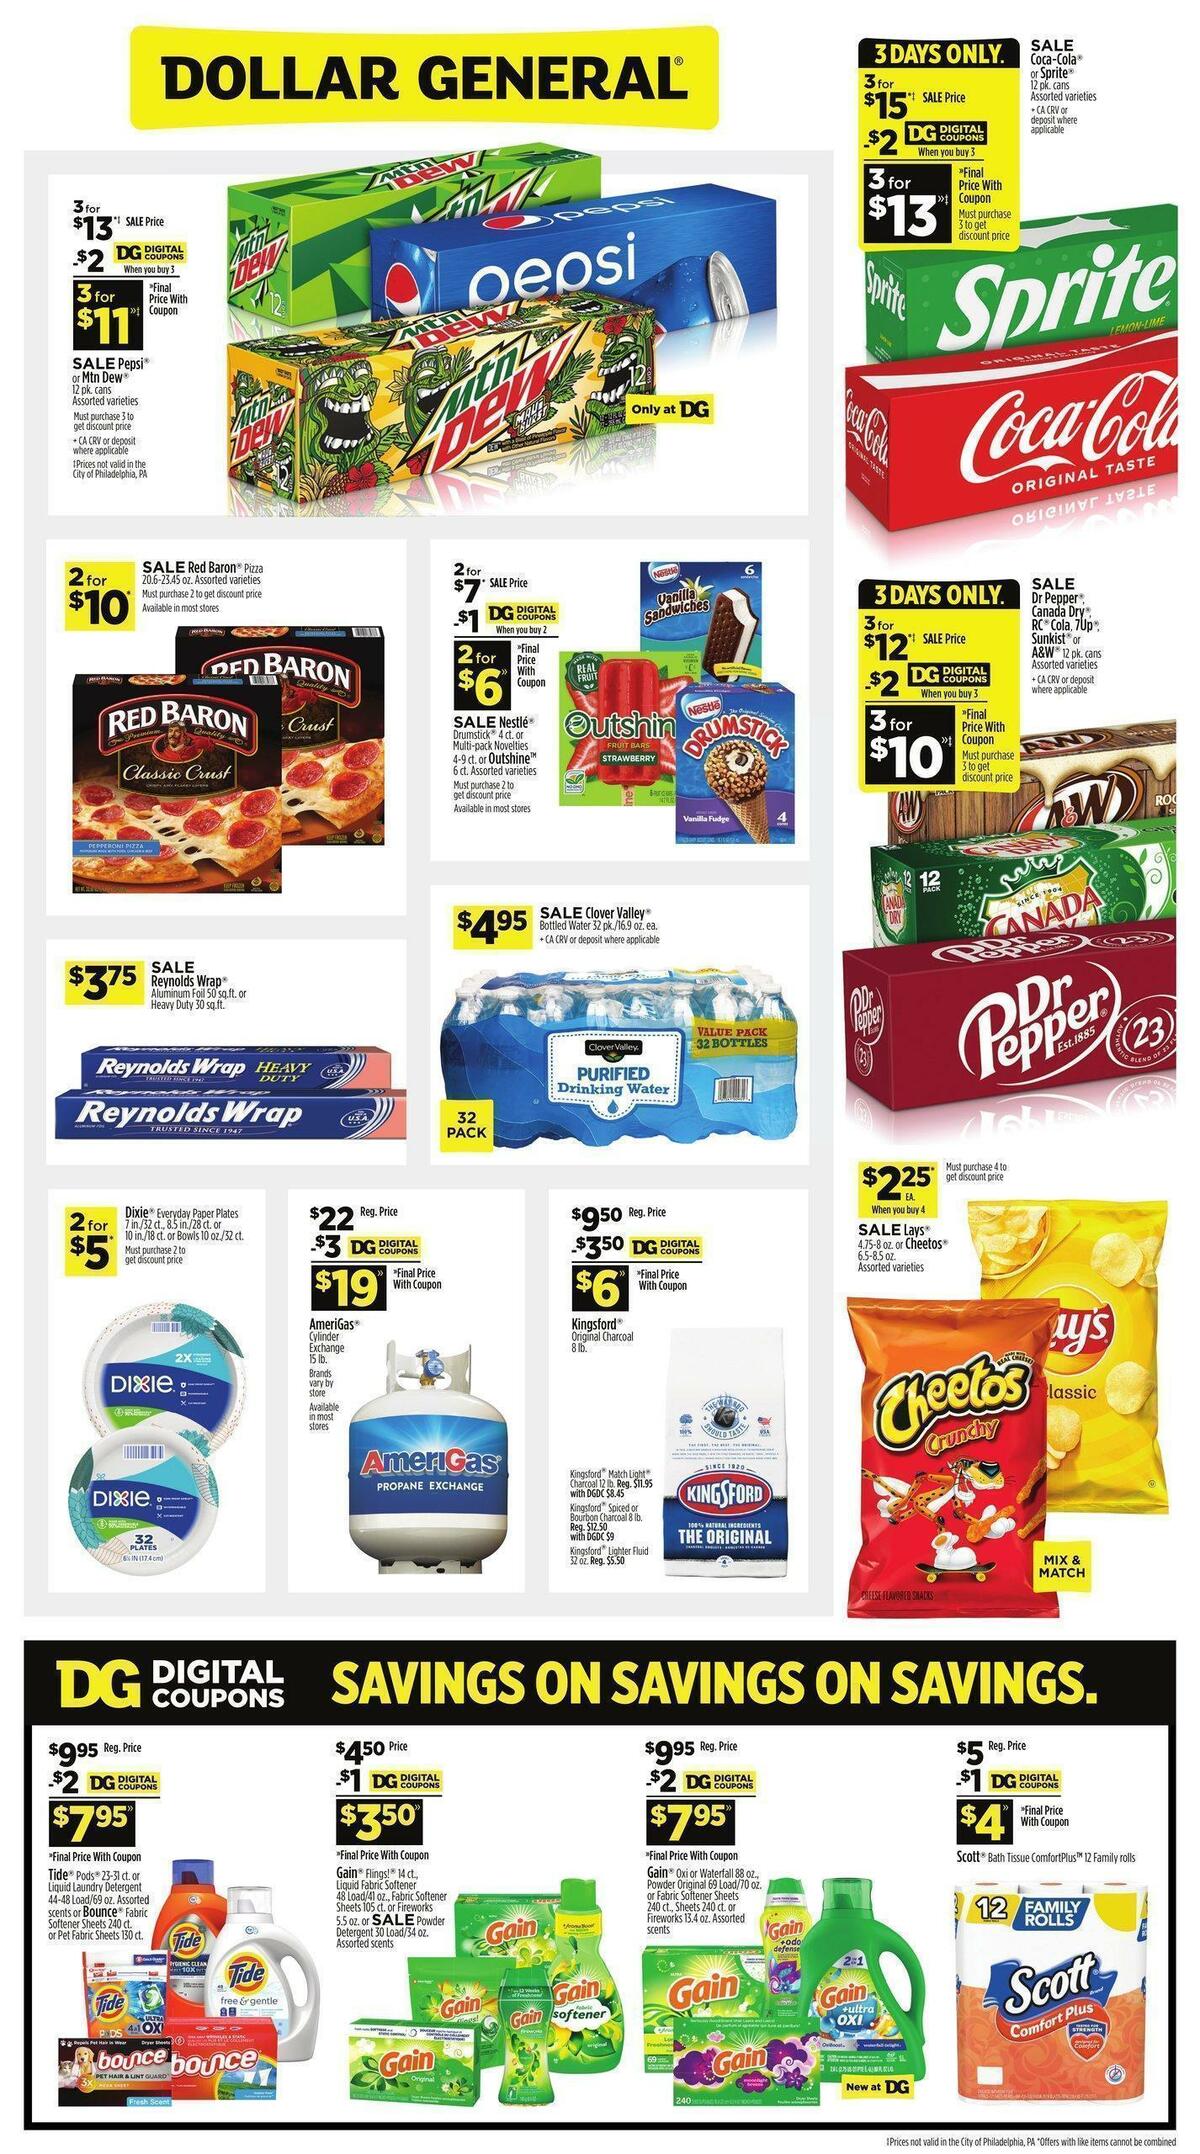 Dollar General Weekly Ad from May 21